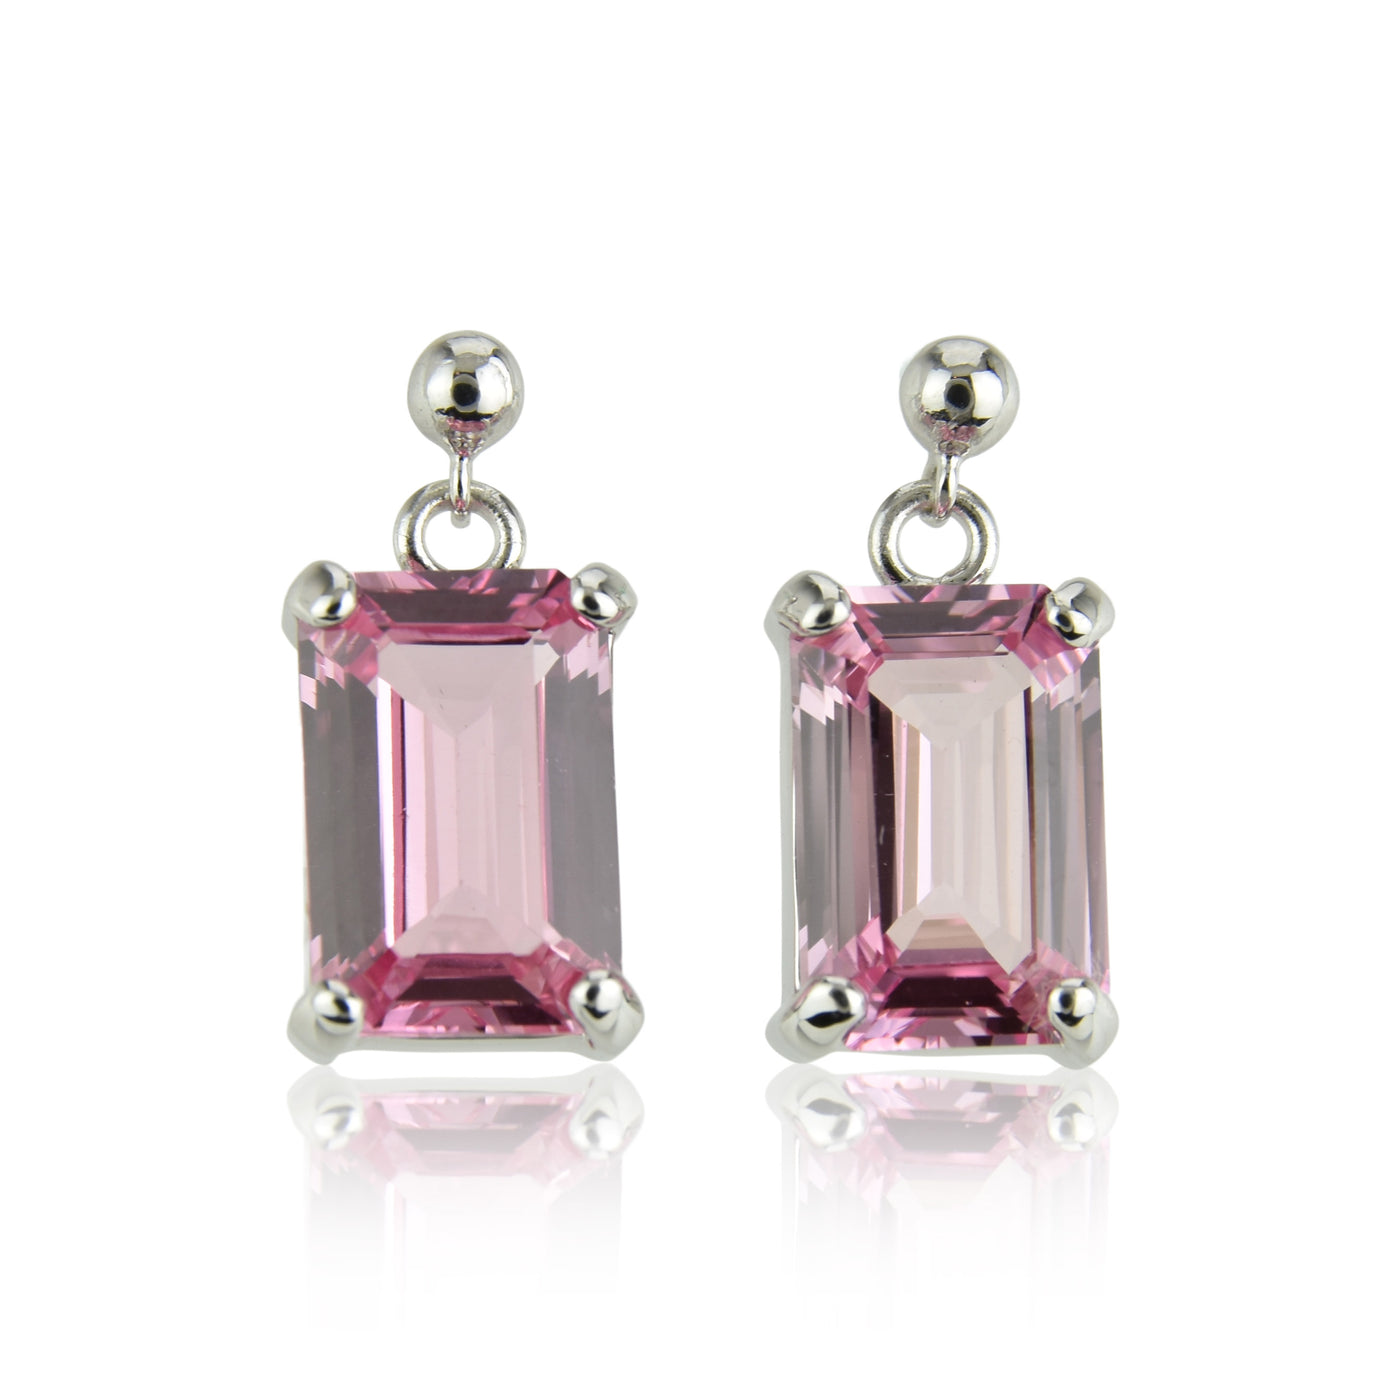 Imperial Pink Sapphire